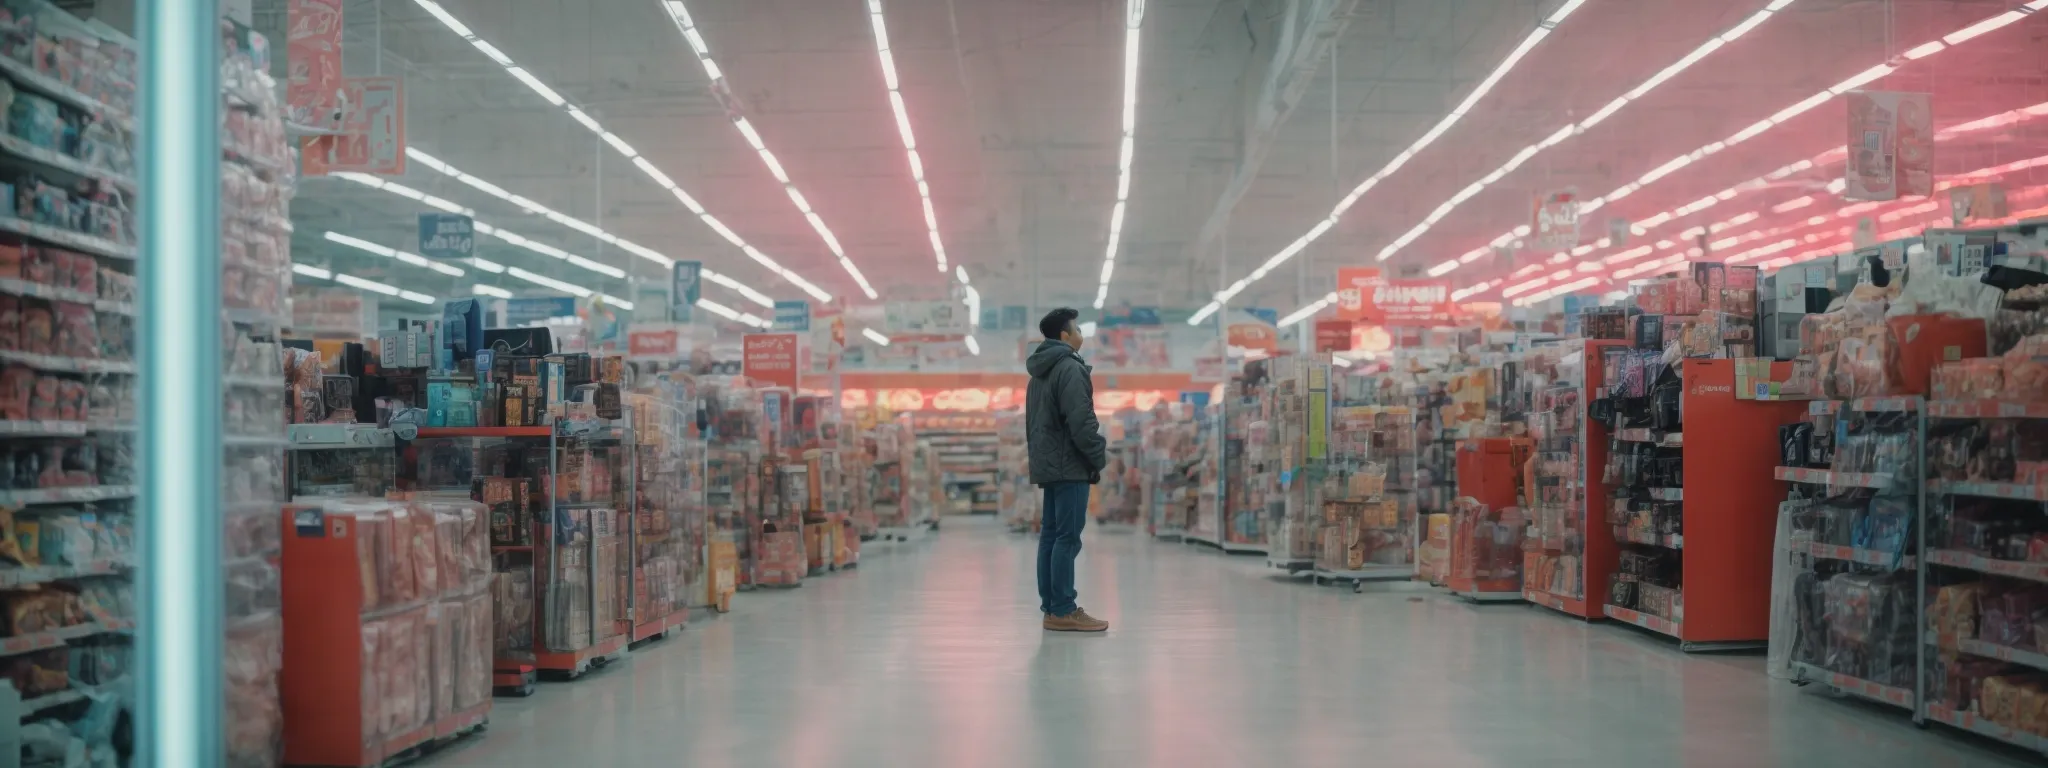 a shopper stands perplexed in an electronics store aisle, surrounded by a multitude of options under the bright fluorescent lights.